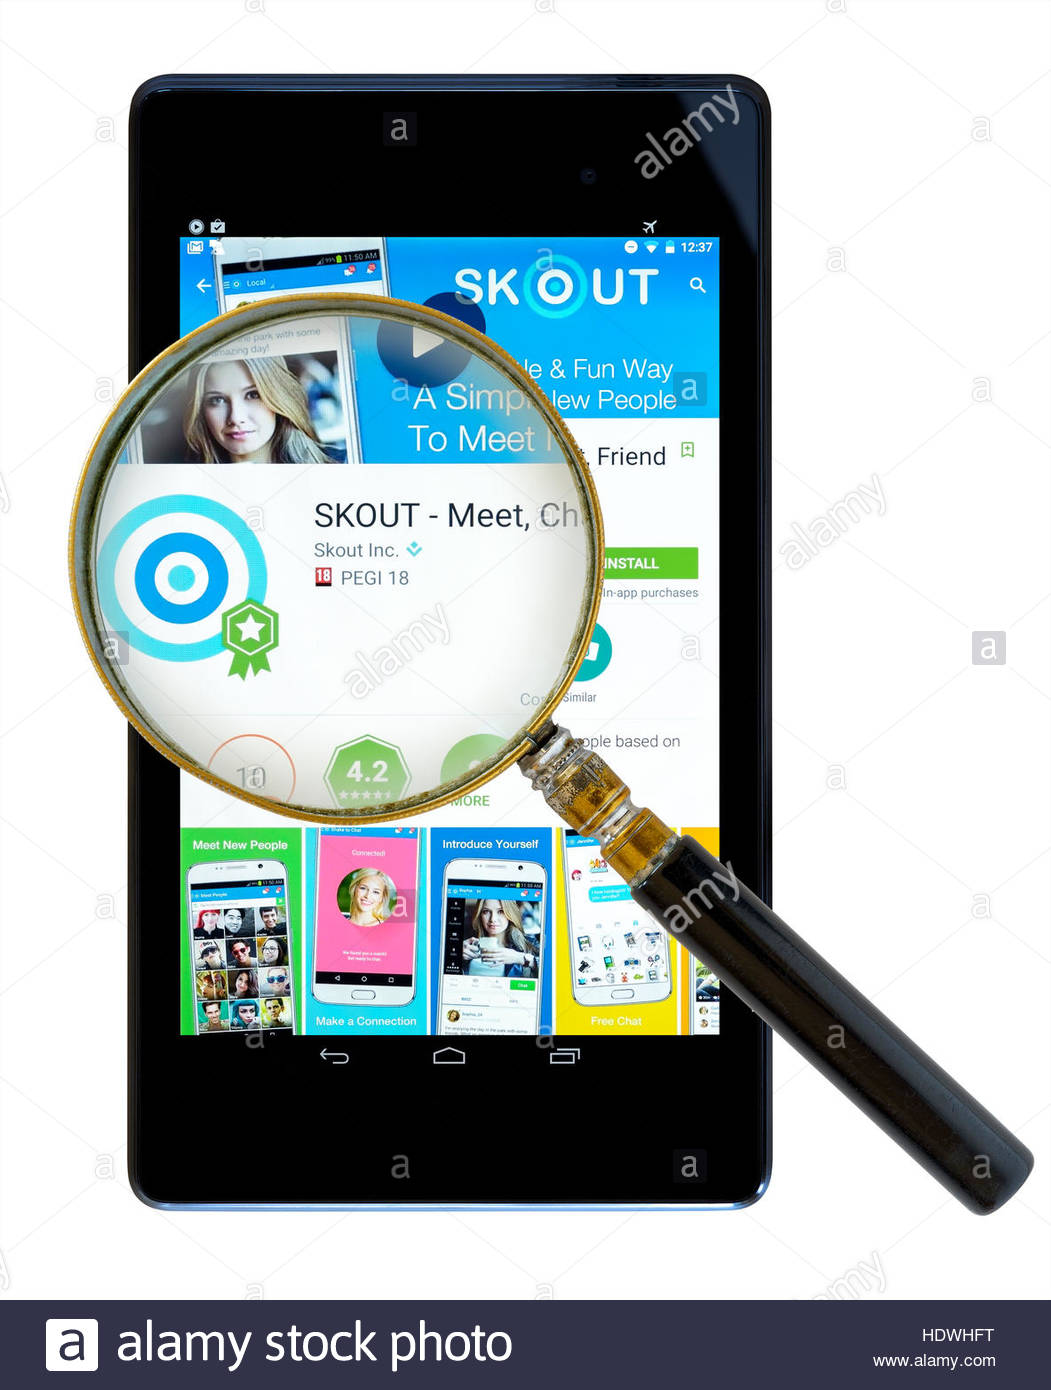 Skout incontri app Android